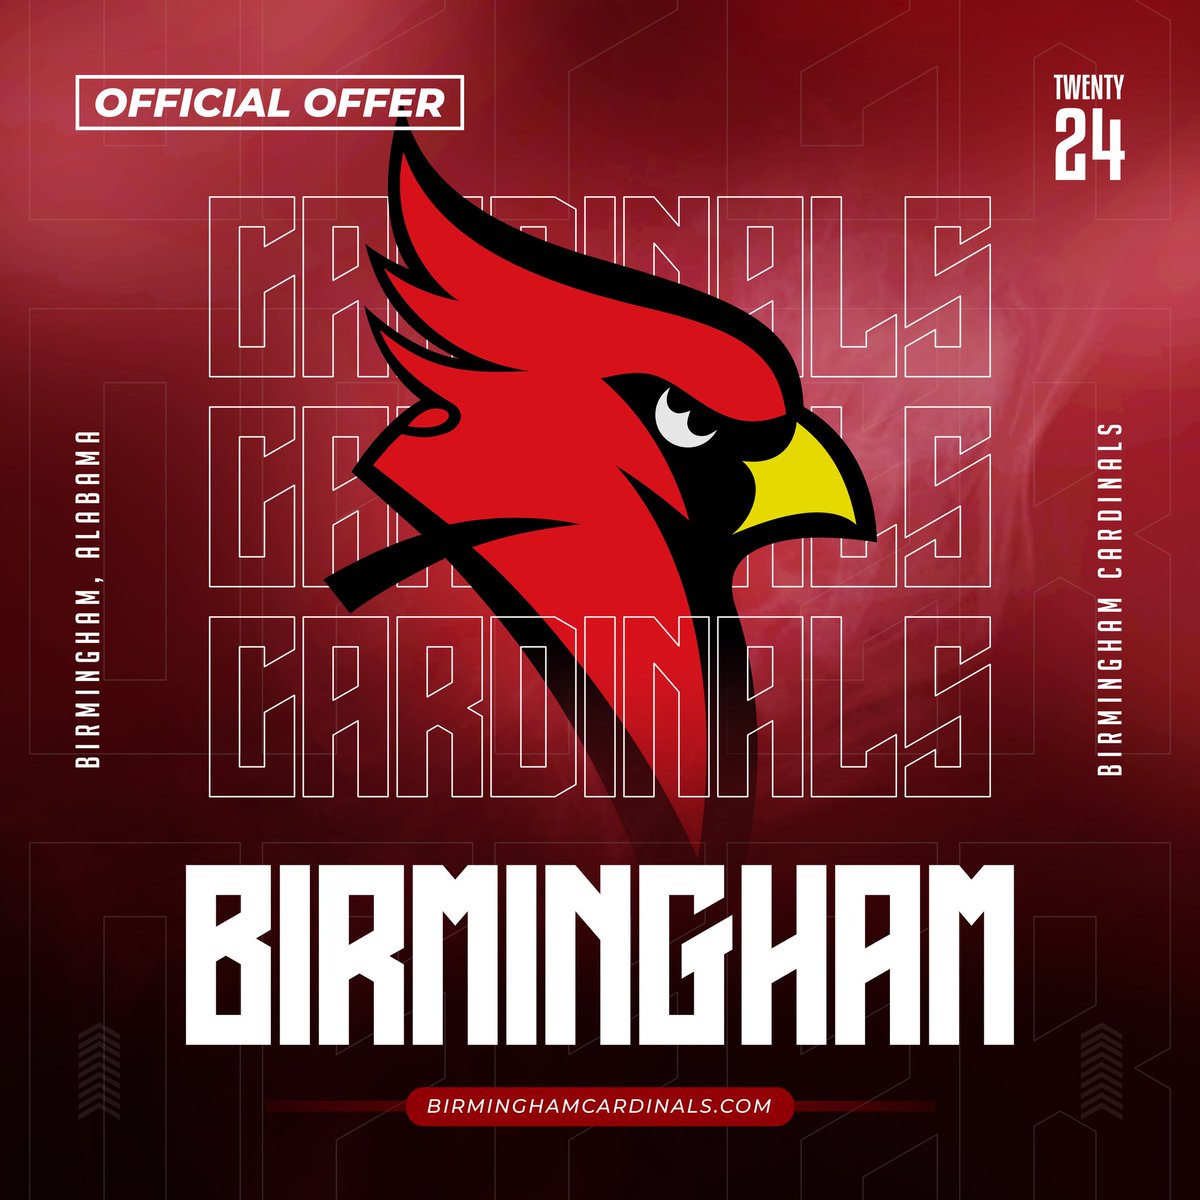 Happy to receive an offer from the Birmingham Cardinals. Thank you, @coachhalwalker, for the opportunity.